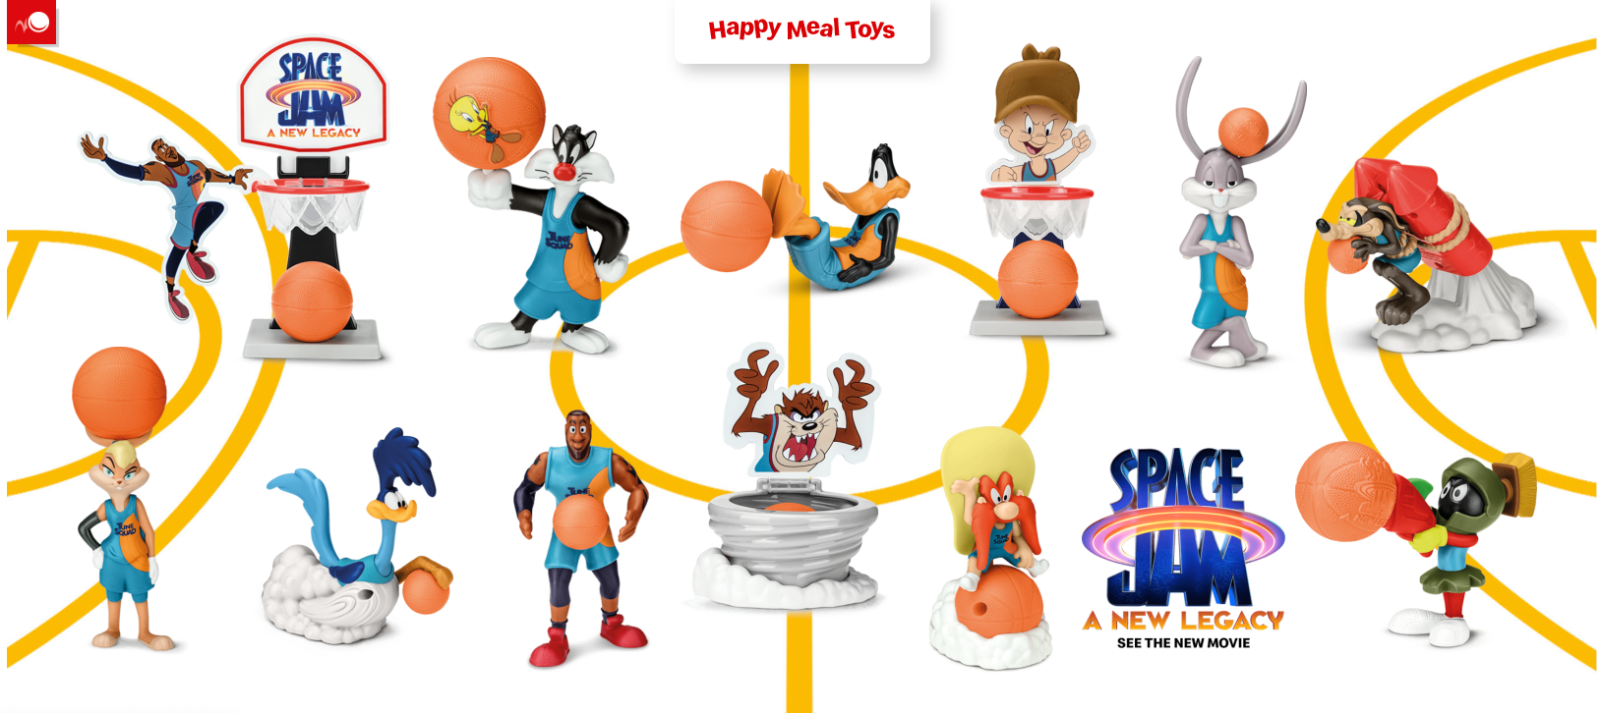 Mcdonald's 2021 Space Jam 2 Happy Meal Toys! Lebron James! Pick Your Favorites!